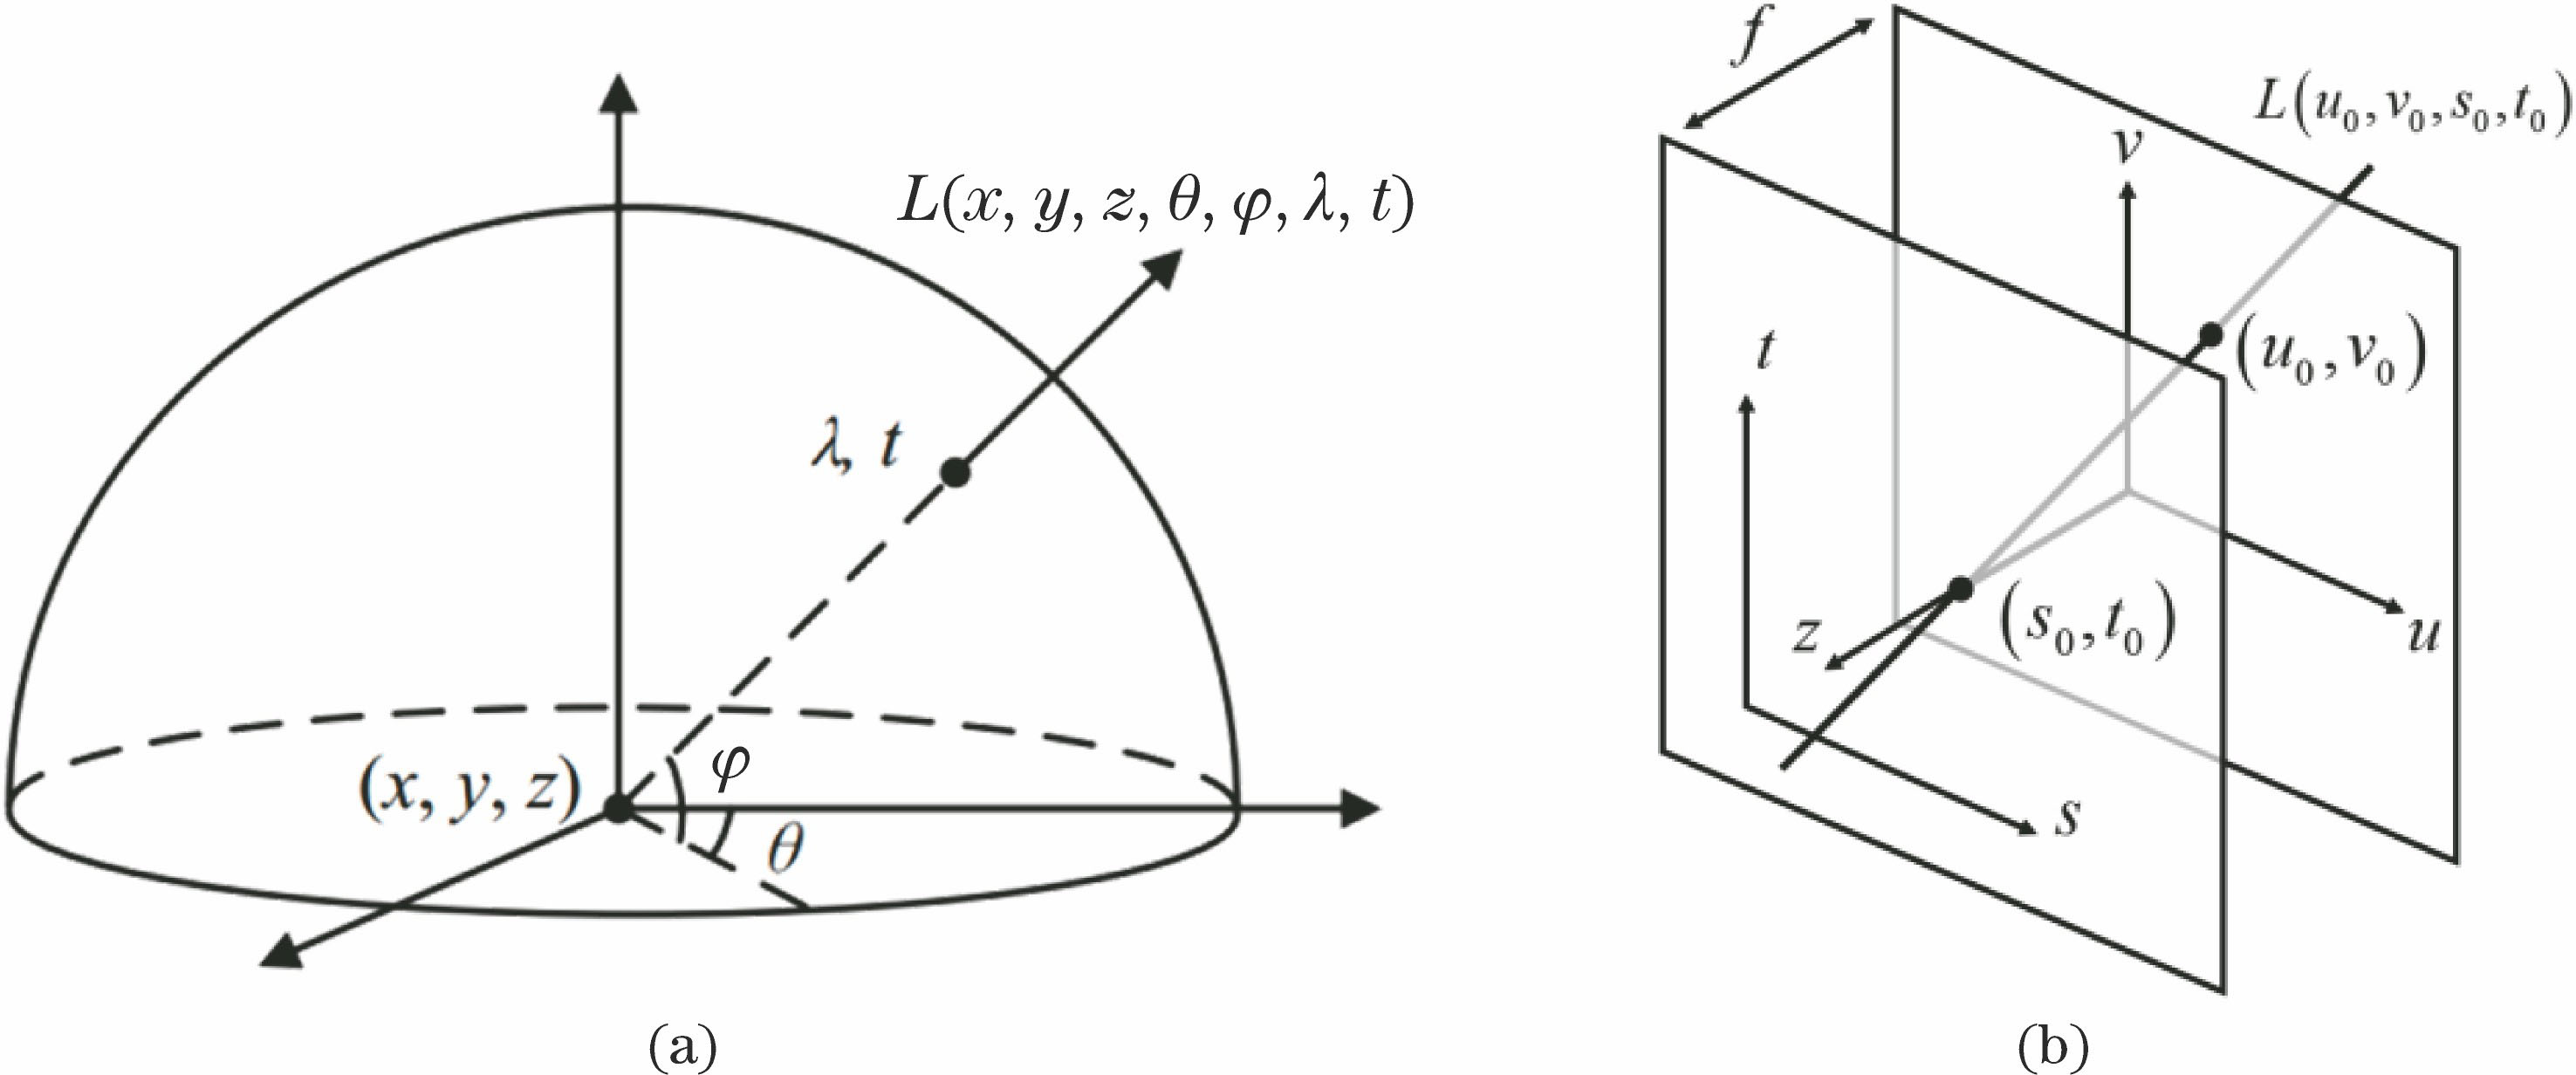 Schematics of (a) the seven-dimensional plenoptic function and (b) the four-dimensional simplified light field